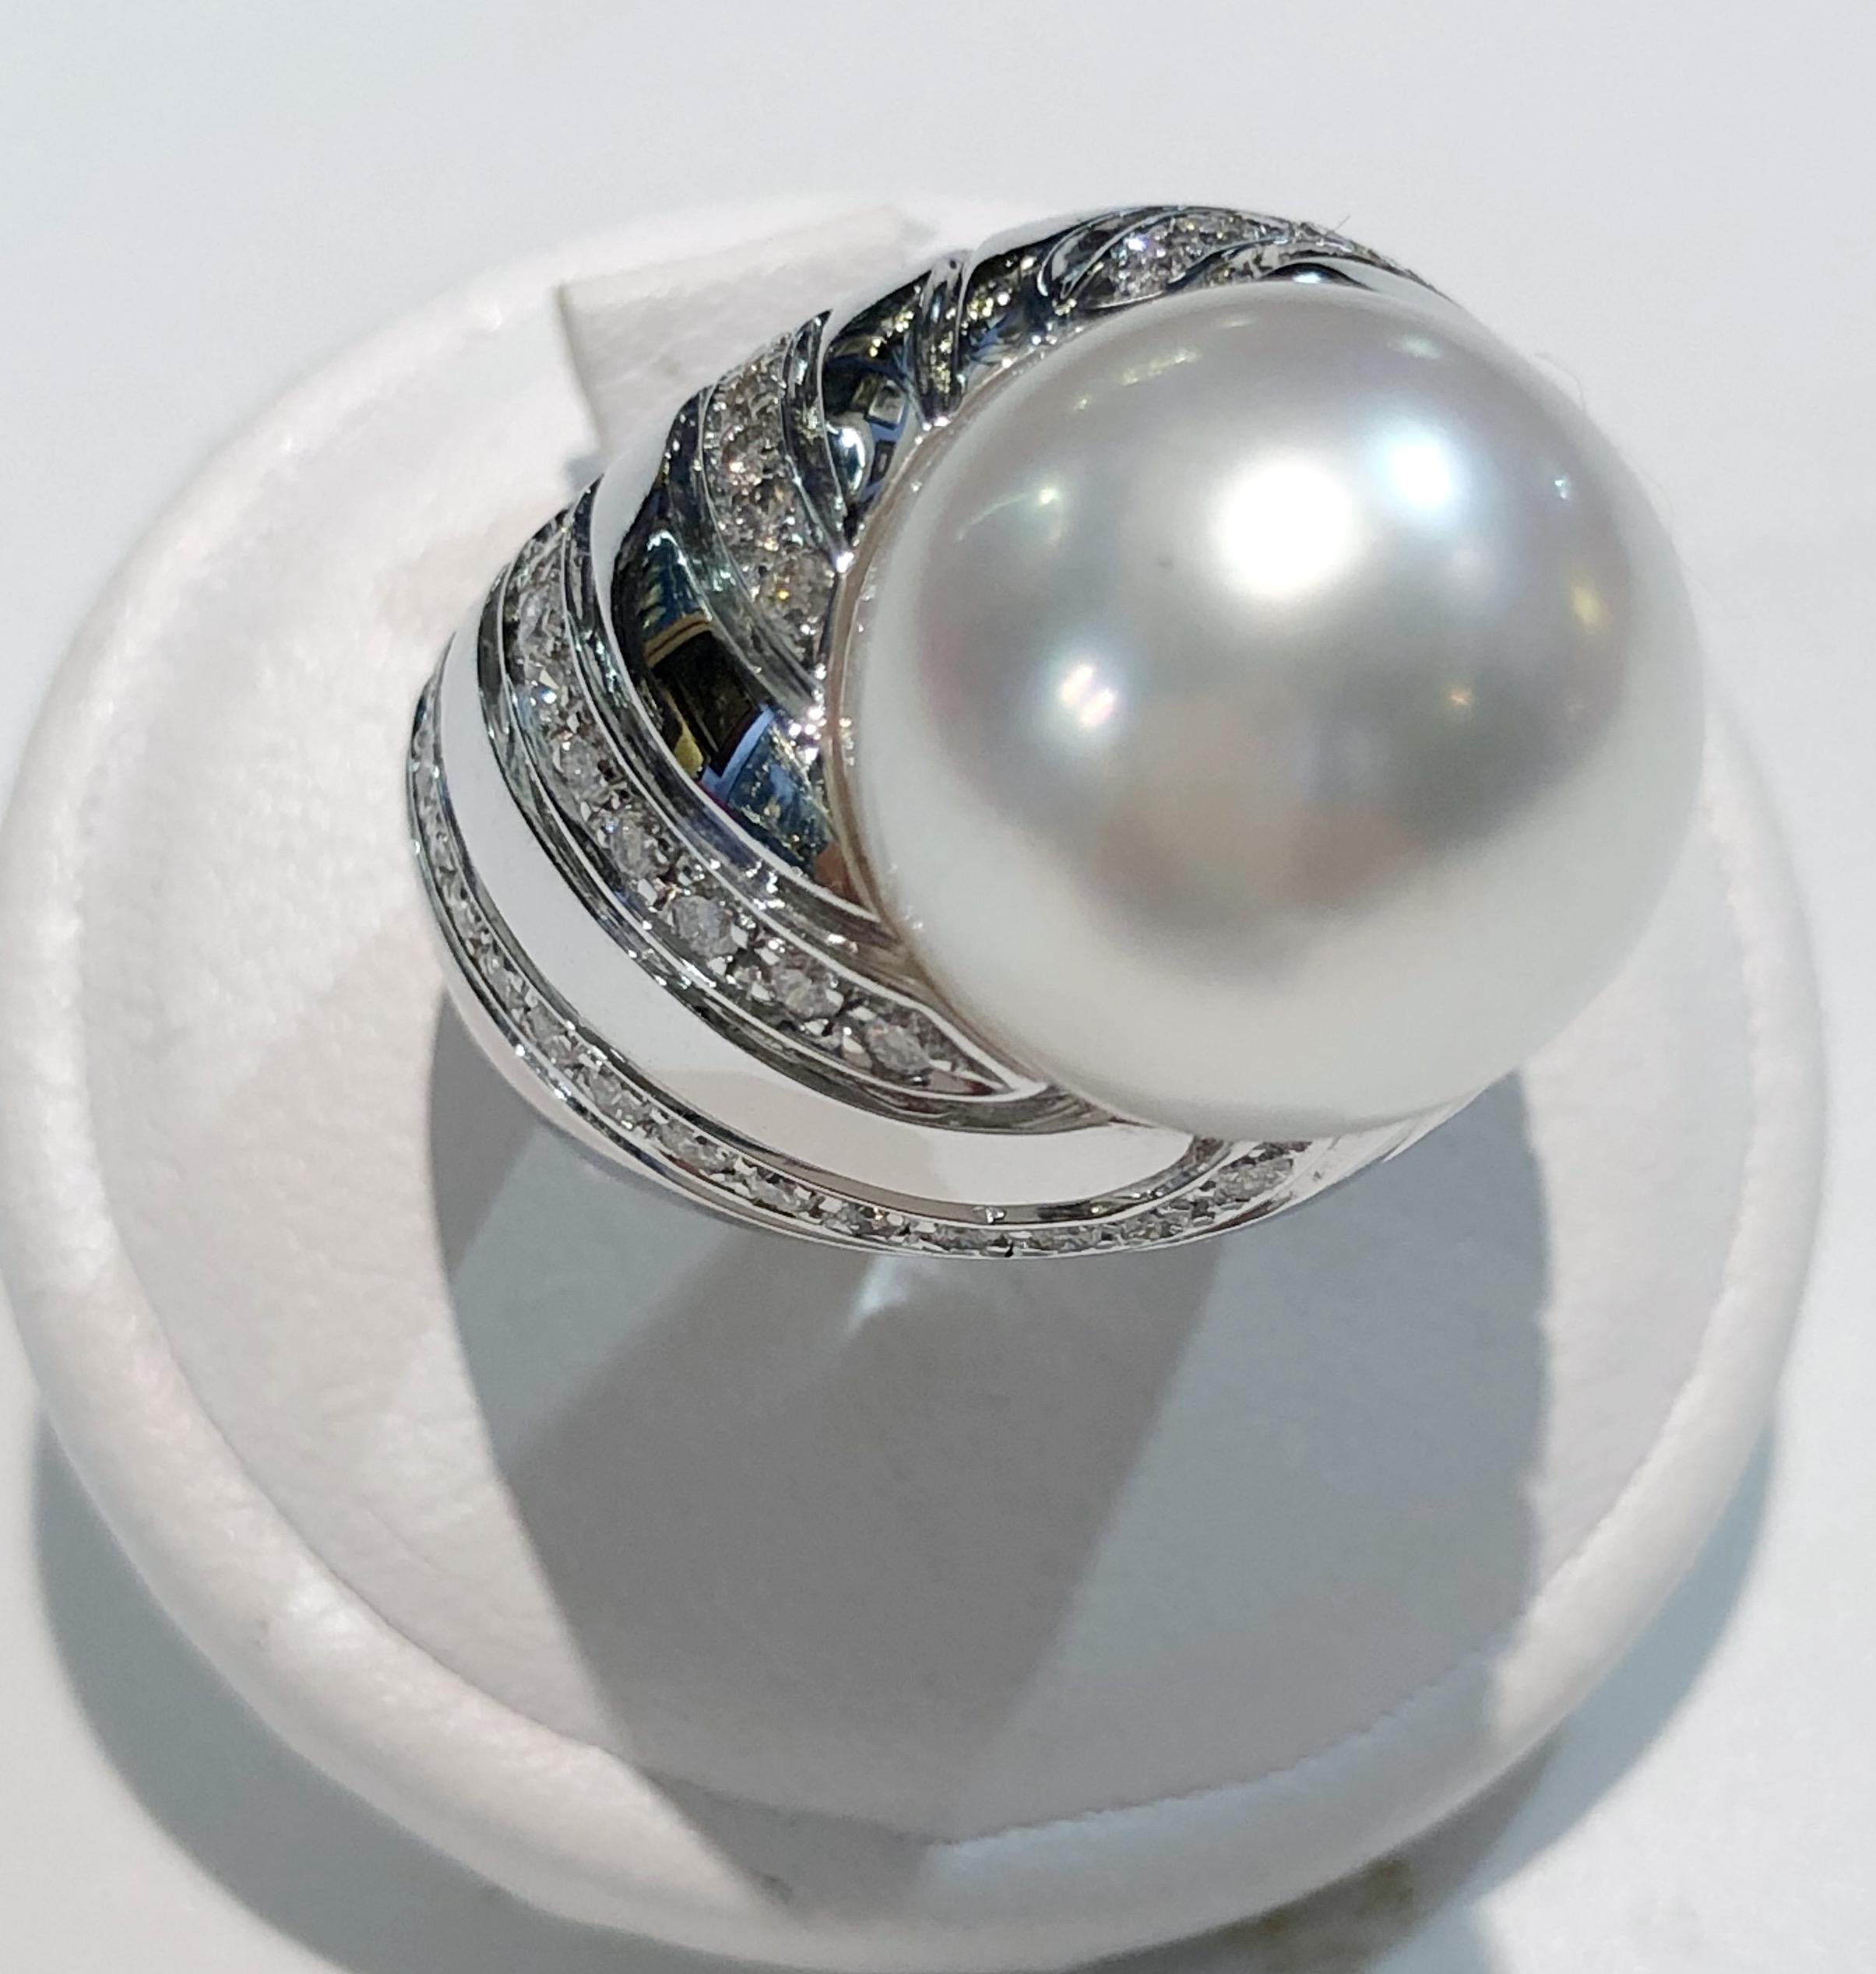 Vintage ring with 18 karat white gold band, one large Australia pearl of 13 mm and brilliant diamonds for a total of 0.6 karats, Italy 1950s
Ring size US 7